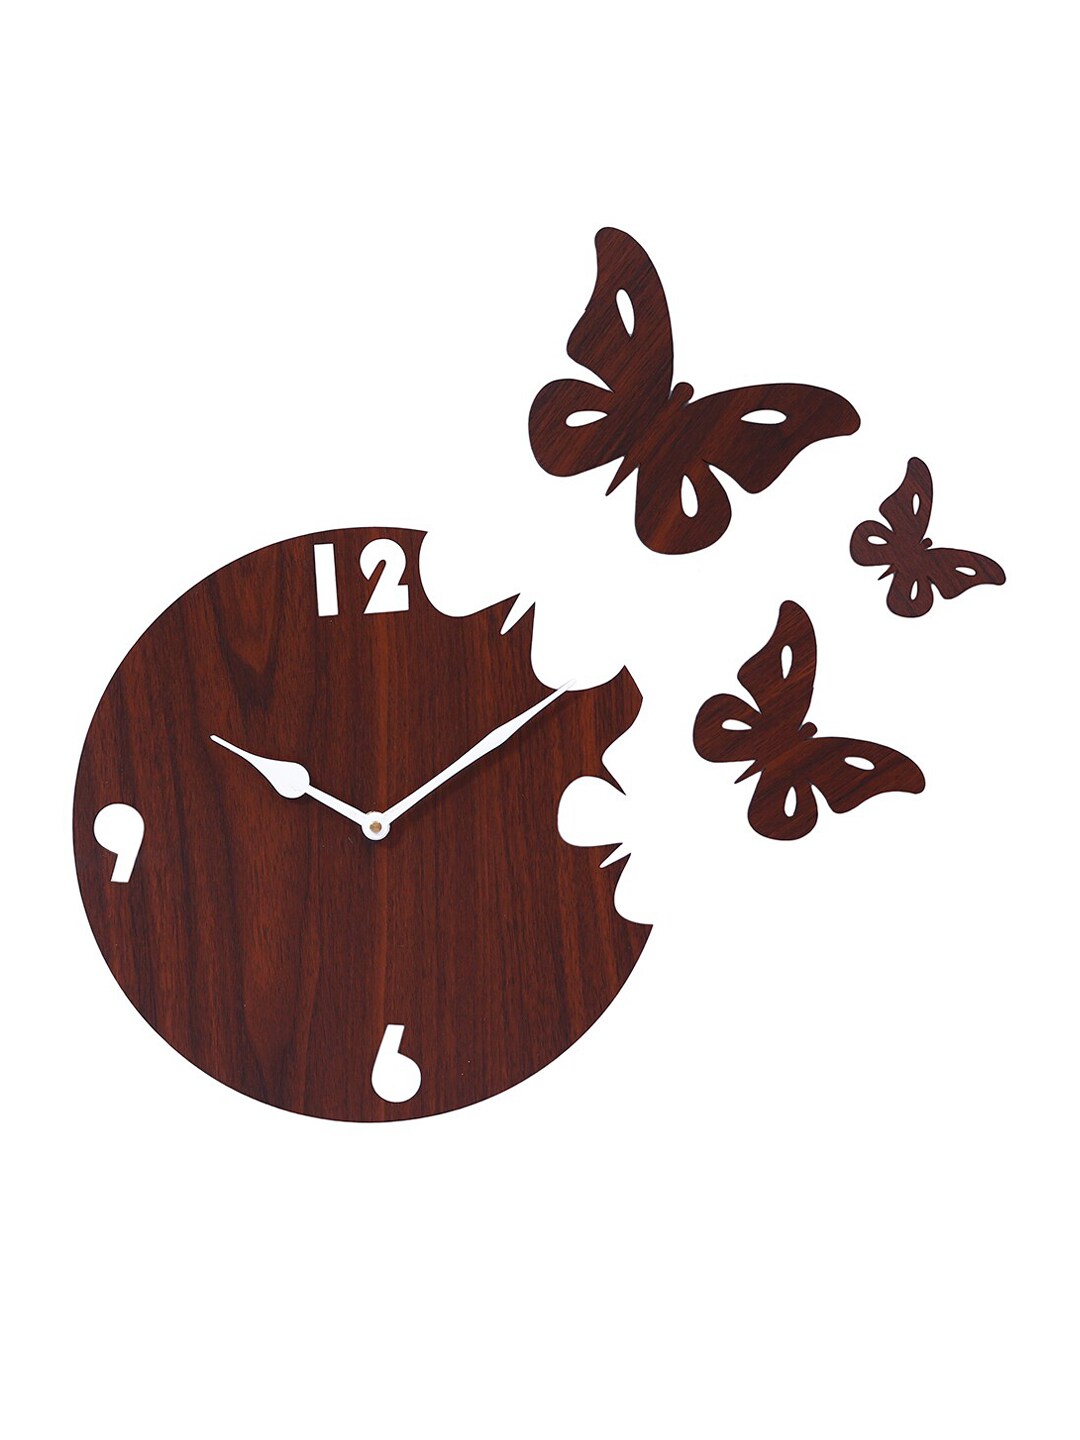 ROMEE Brown Round Textured 27 cm Analogue Wall Clock Price in India